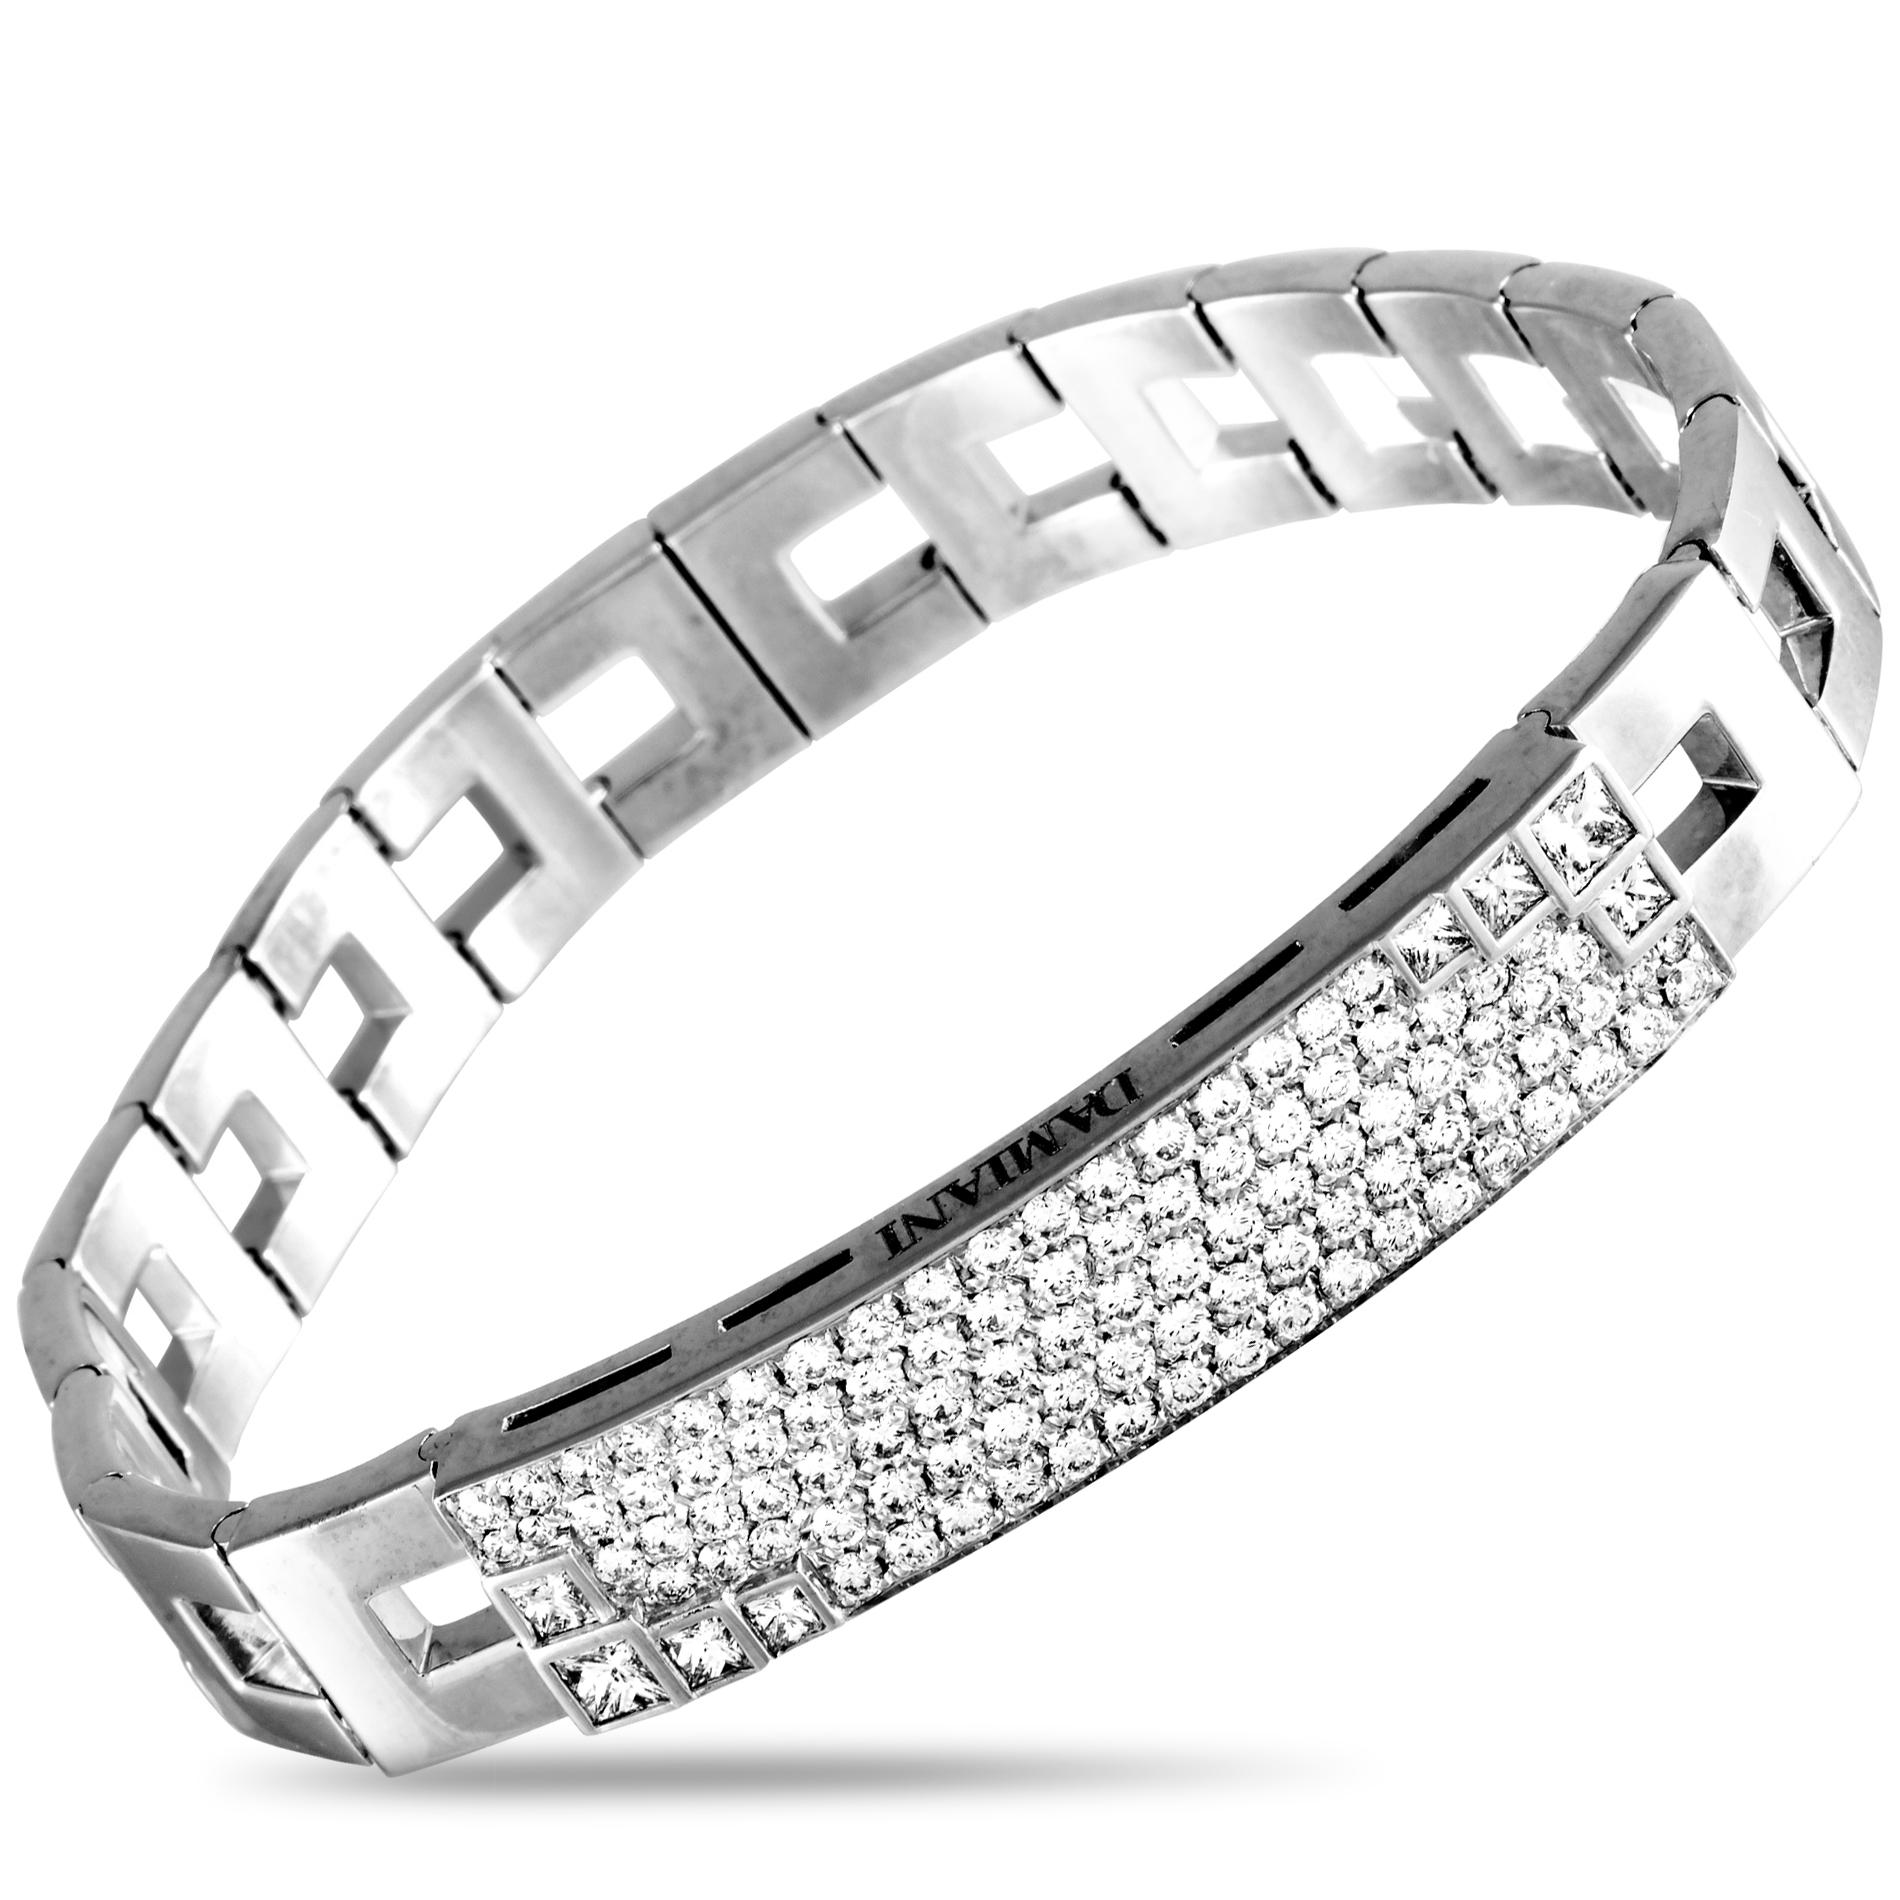 This Damiani bracelet is made out of 18K white gold and diamonds that weigh 3.26 carats in total. The bracelet weighs 53.7 grams and measures 7.50” in length, while the pendant is 2.00” long.
 
 Offered in brand new condition, this item includes